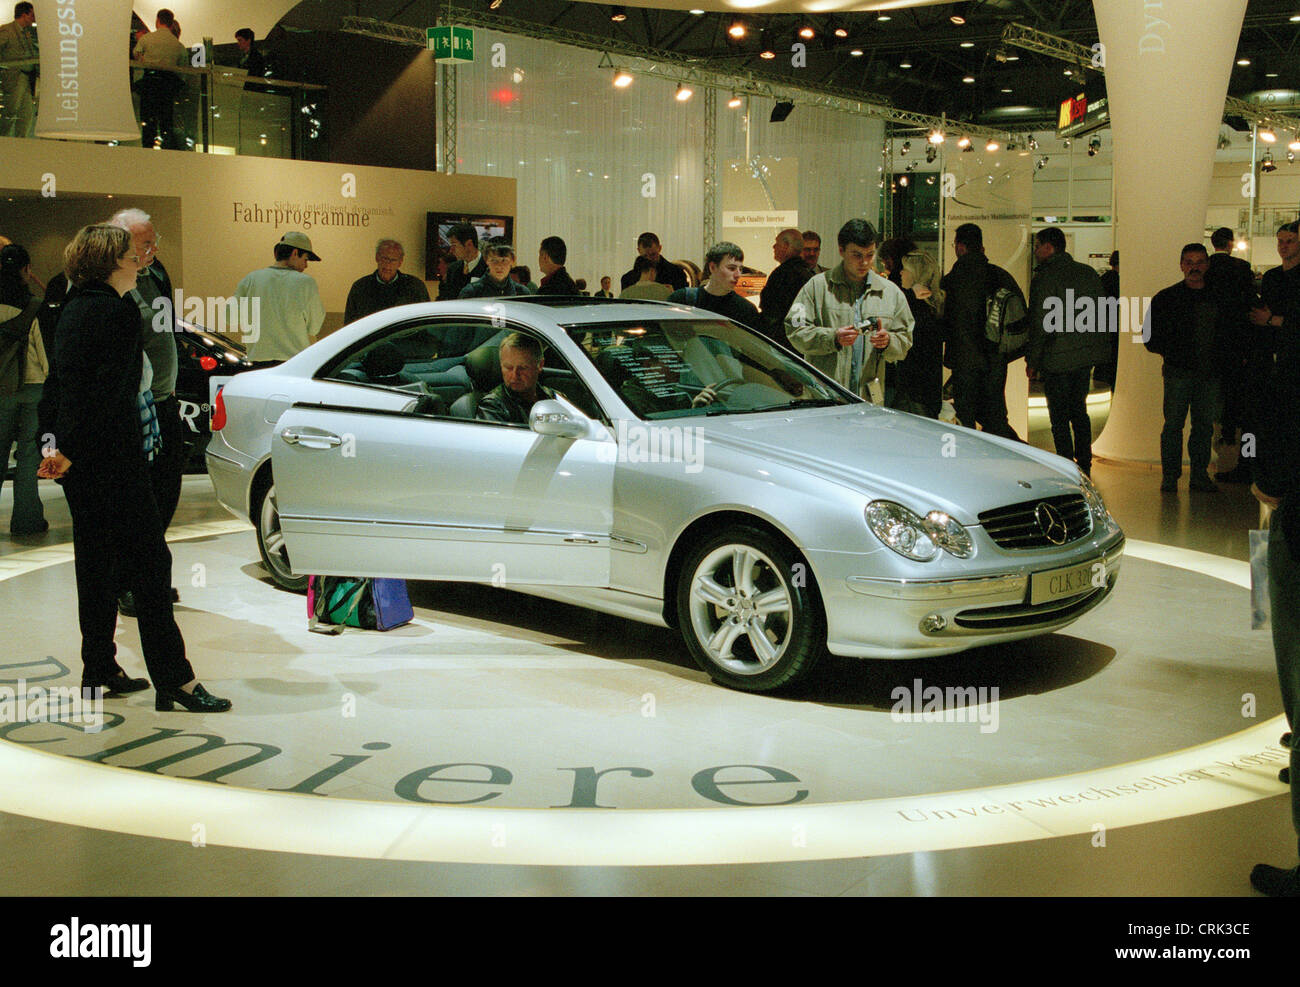 Mercedes presents the new E-Class at the fair Auto Mobil International Stock Photo